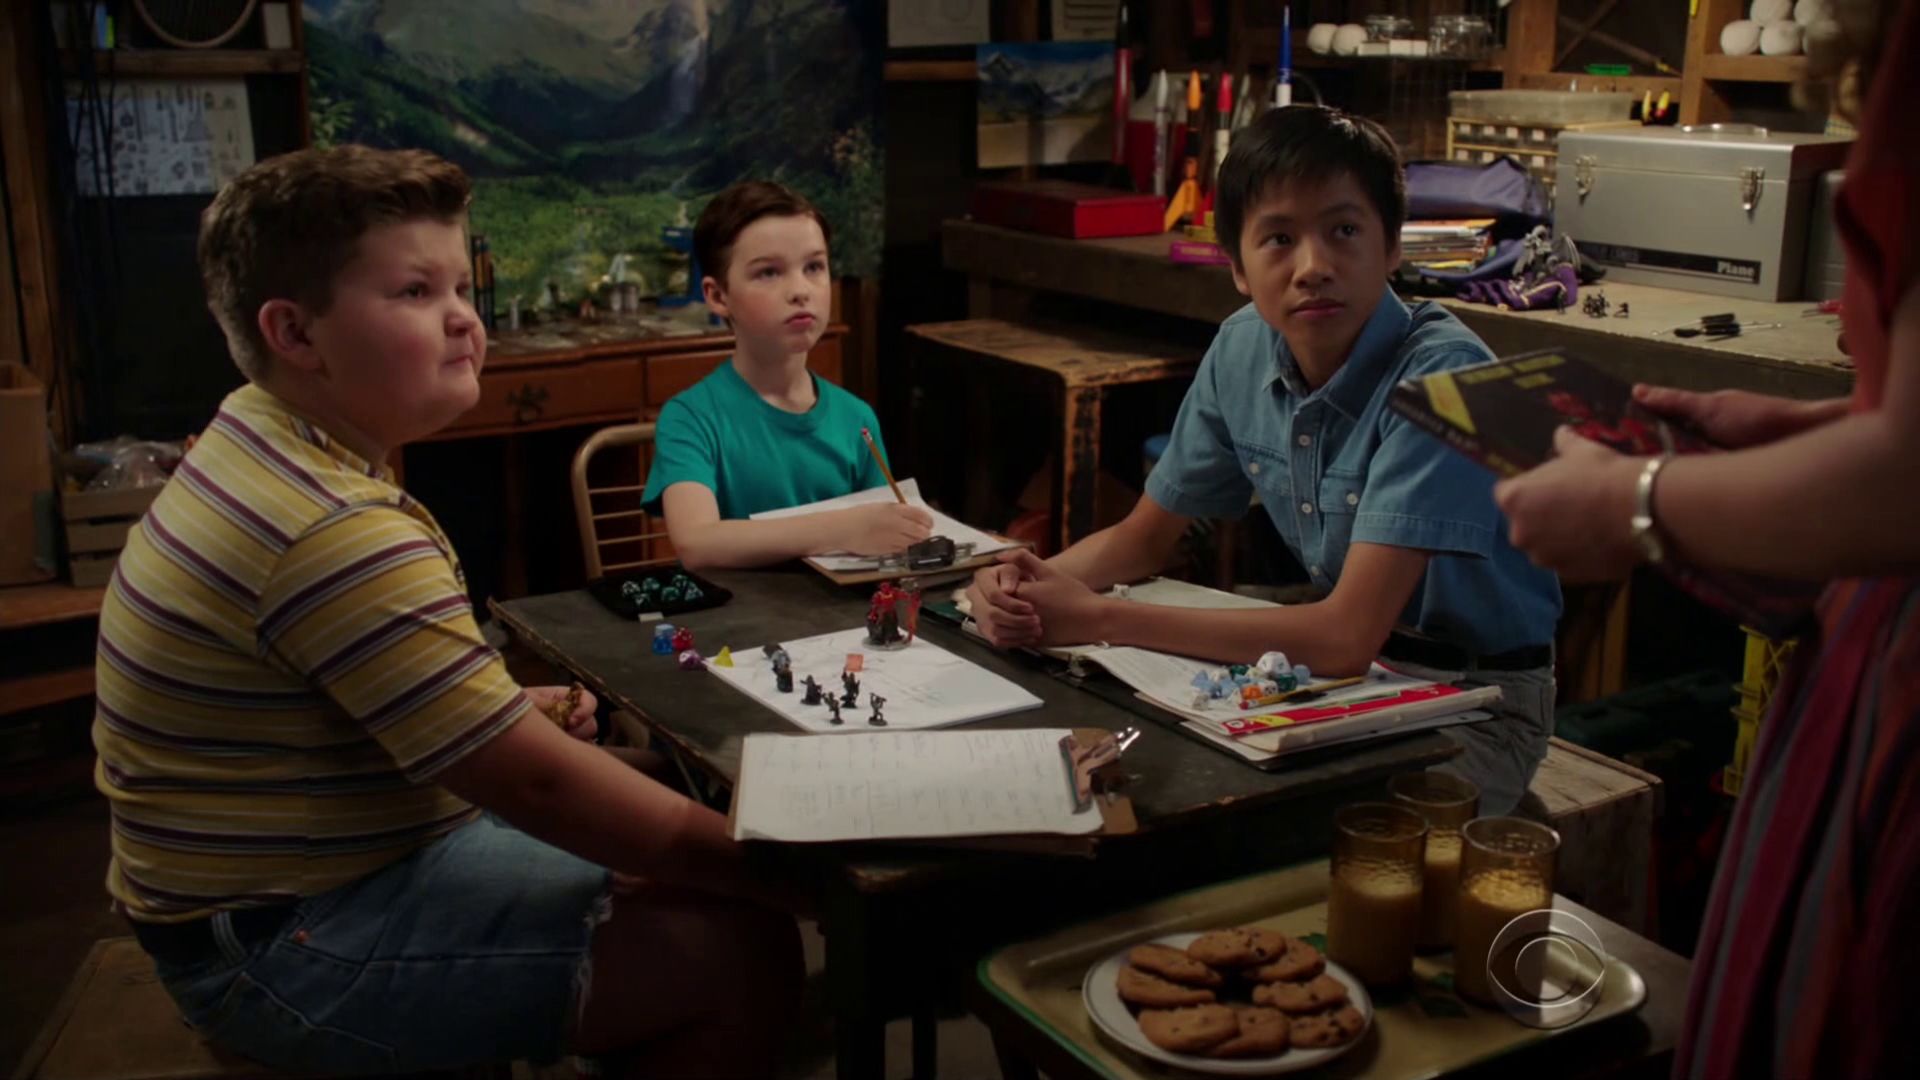 Young Sheldon S1E11 Demons, Sunday School, and Prime Numbers